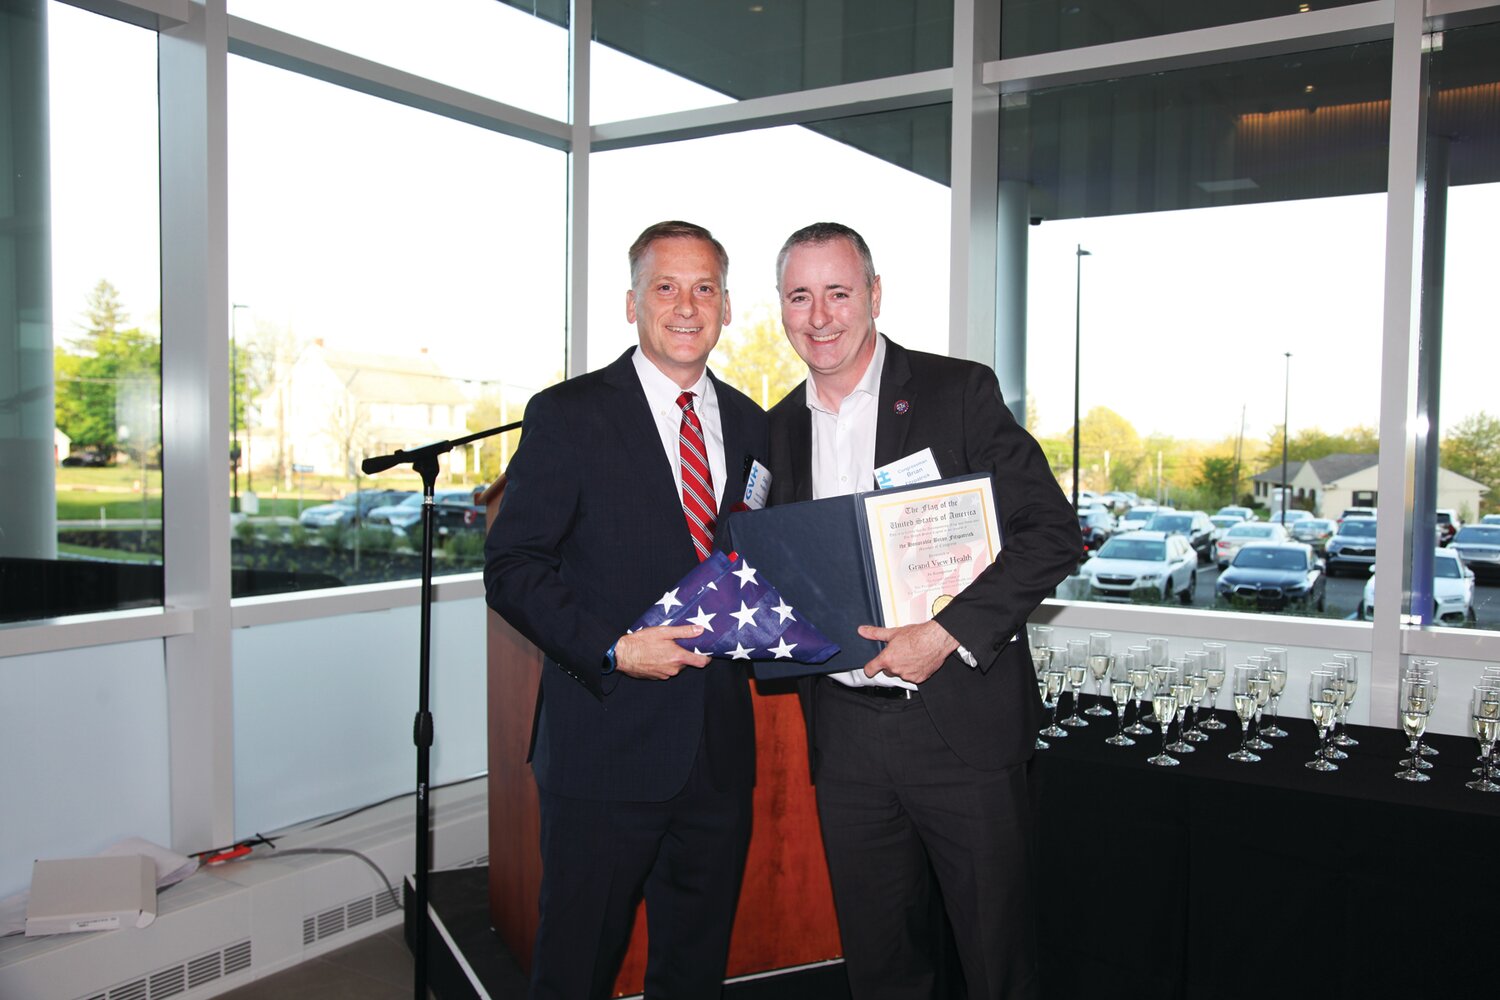 U.S. Rep. Brian Fitzpatrick, right, presents a flag flown over the Capitol to Grand View Health President and Chief Executive Officer Douglas Hughes.